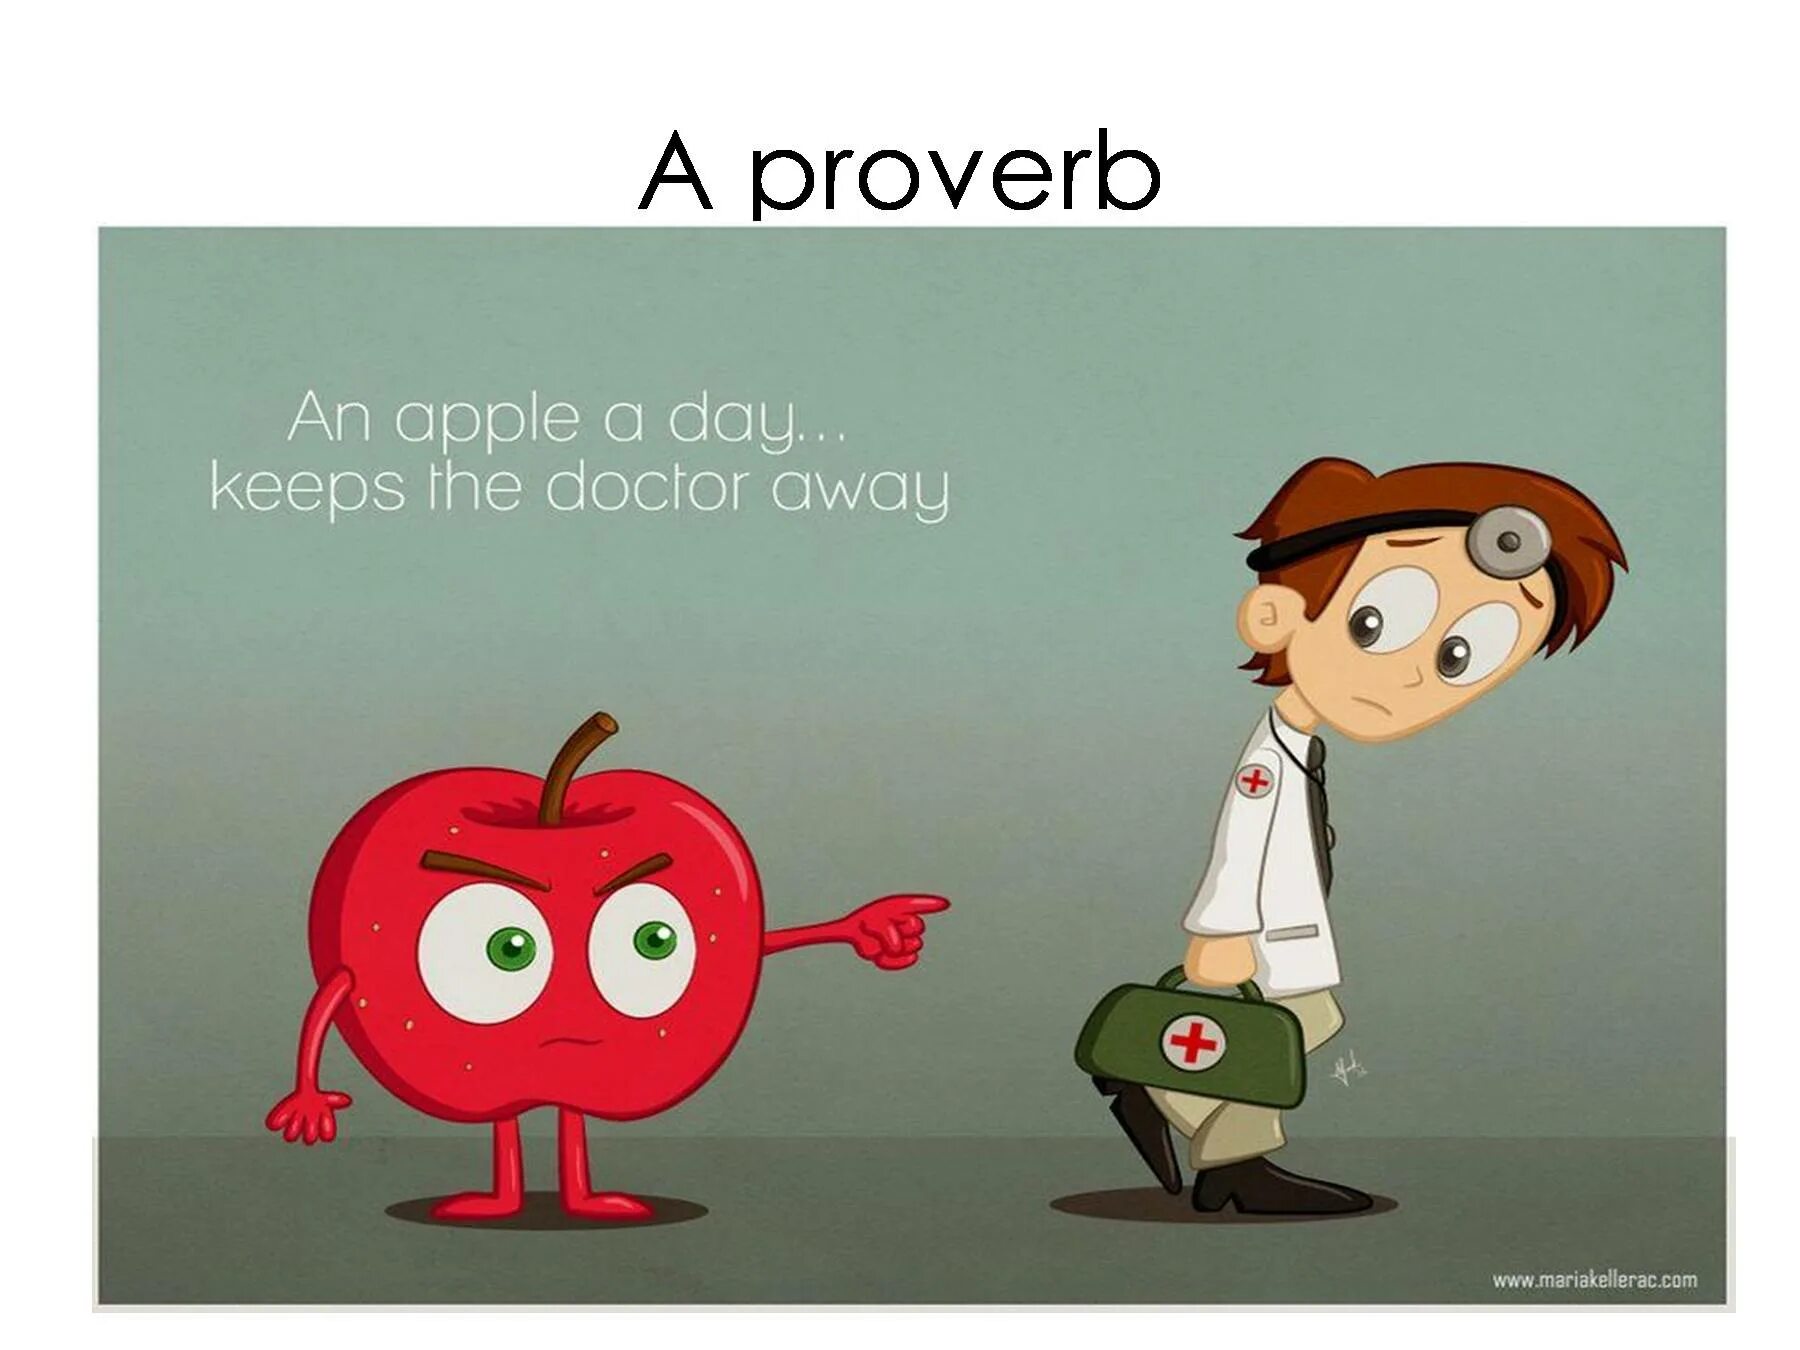 An a day keeps the doctor away. An Apple a Day keeps the Doctor away. Apple keeps Doctor away. Idioms an Apple a Day keeps the Doctor away. Two Apples a Day keeps the Doctor away.